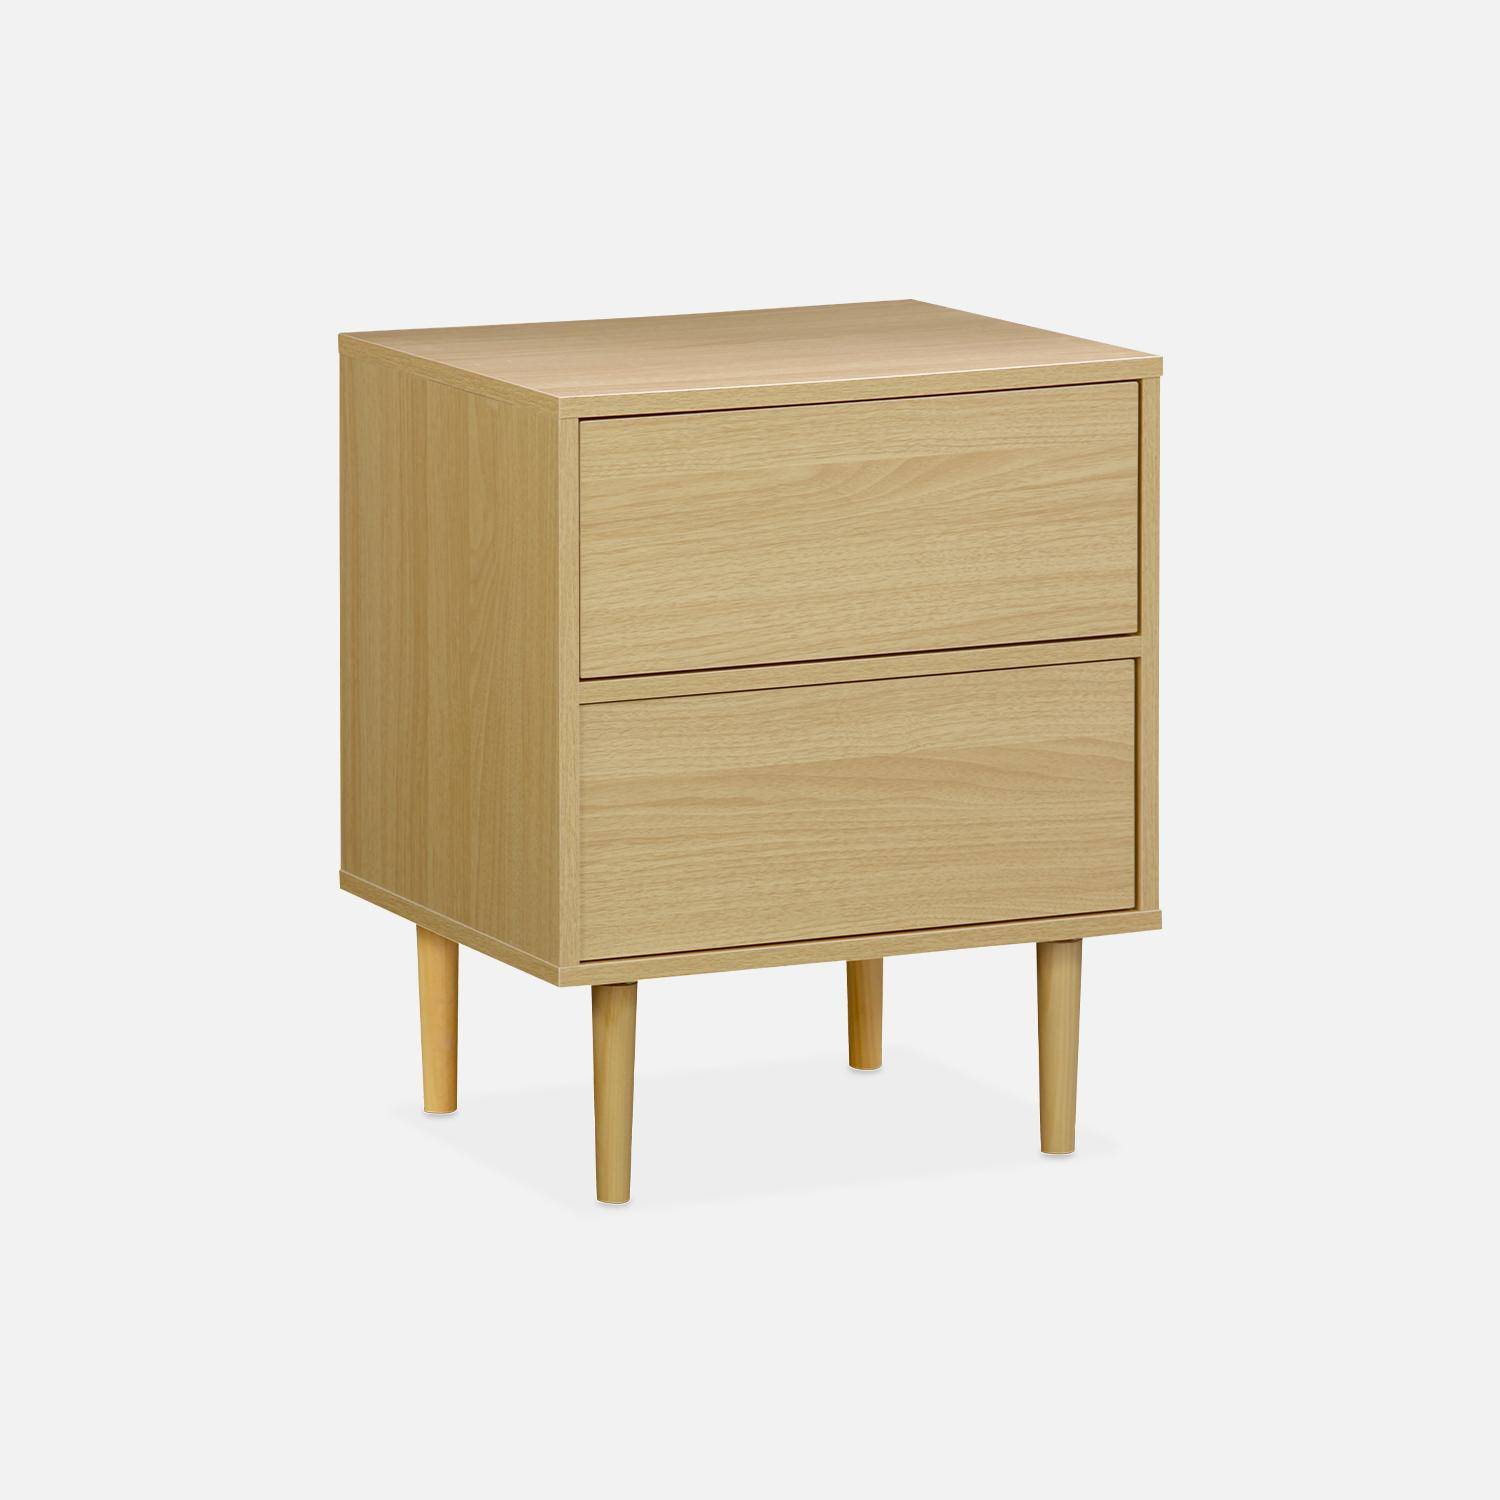 Pair of wood-effect bedside tables with two drawers, 48x40x59cm - Mika - Natural Wood Photo5